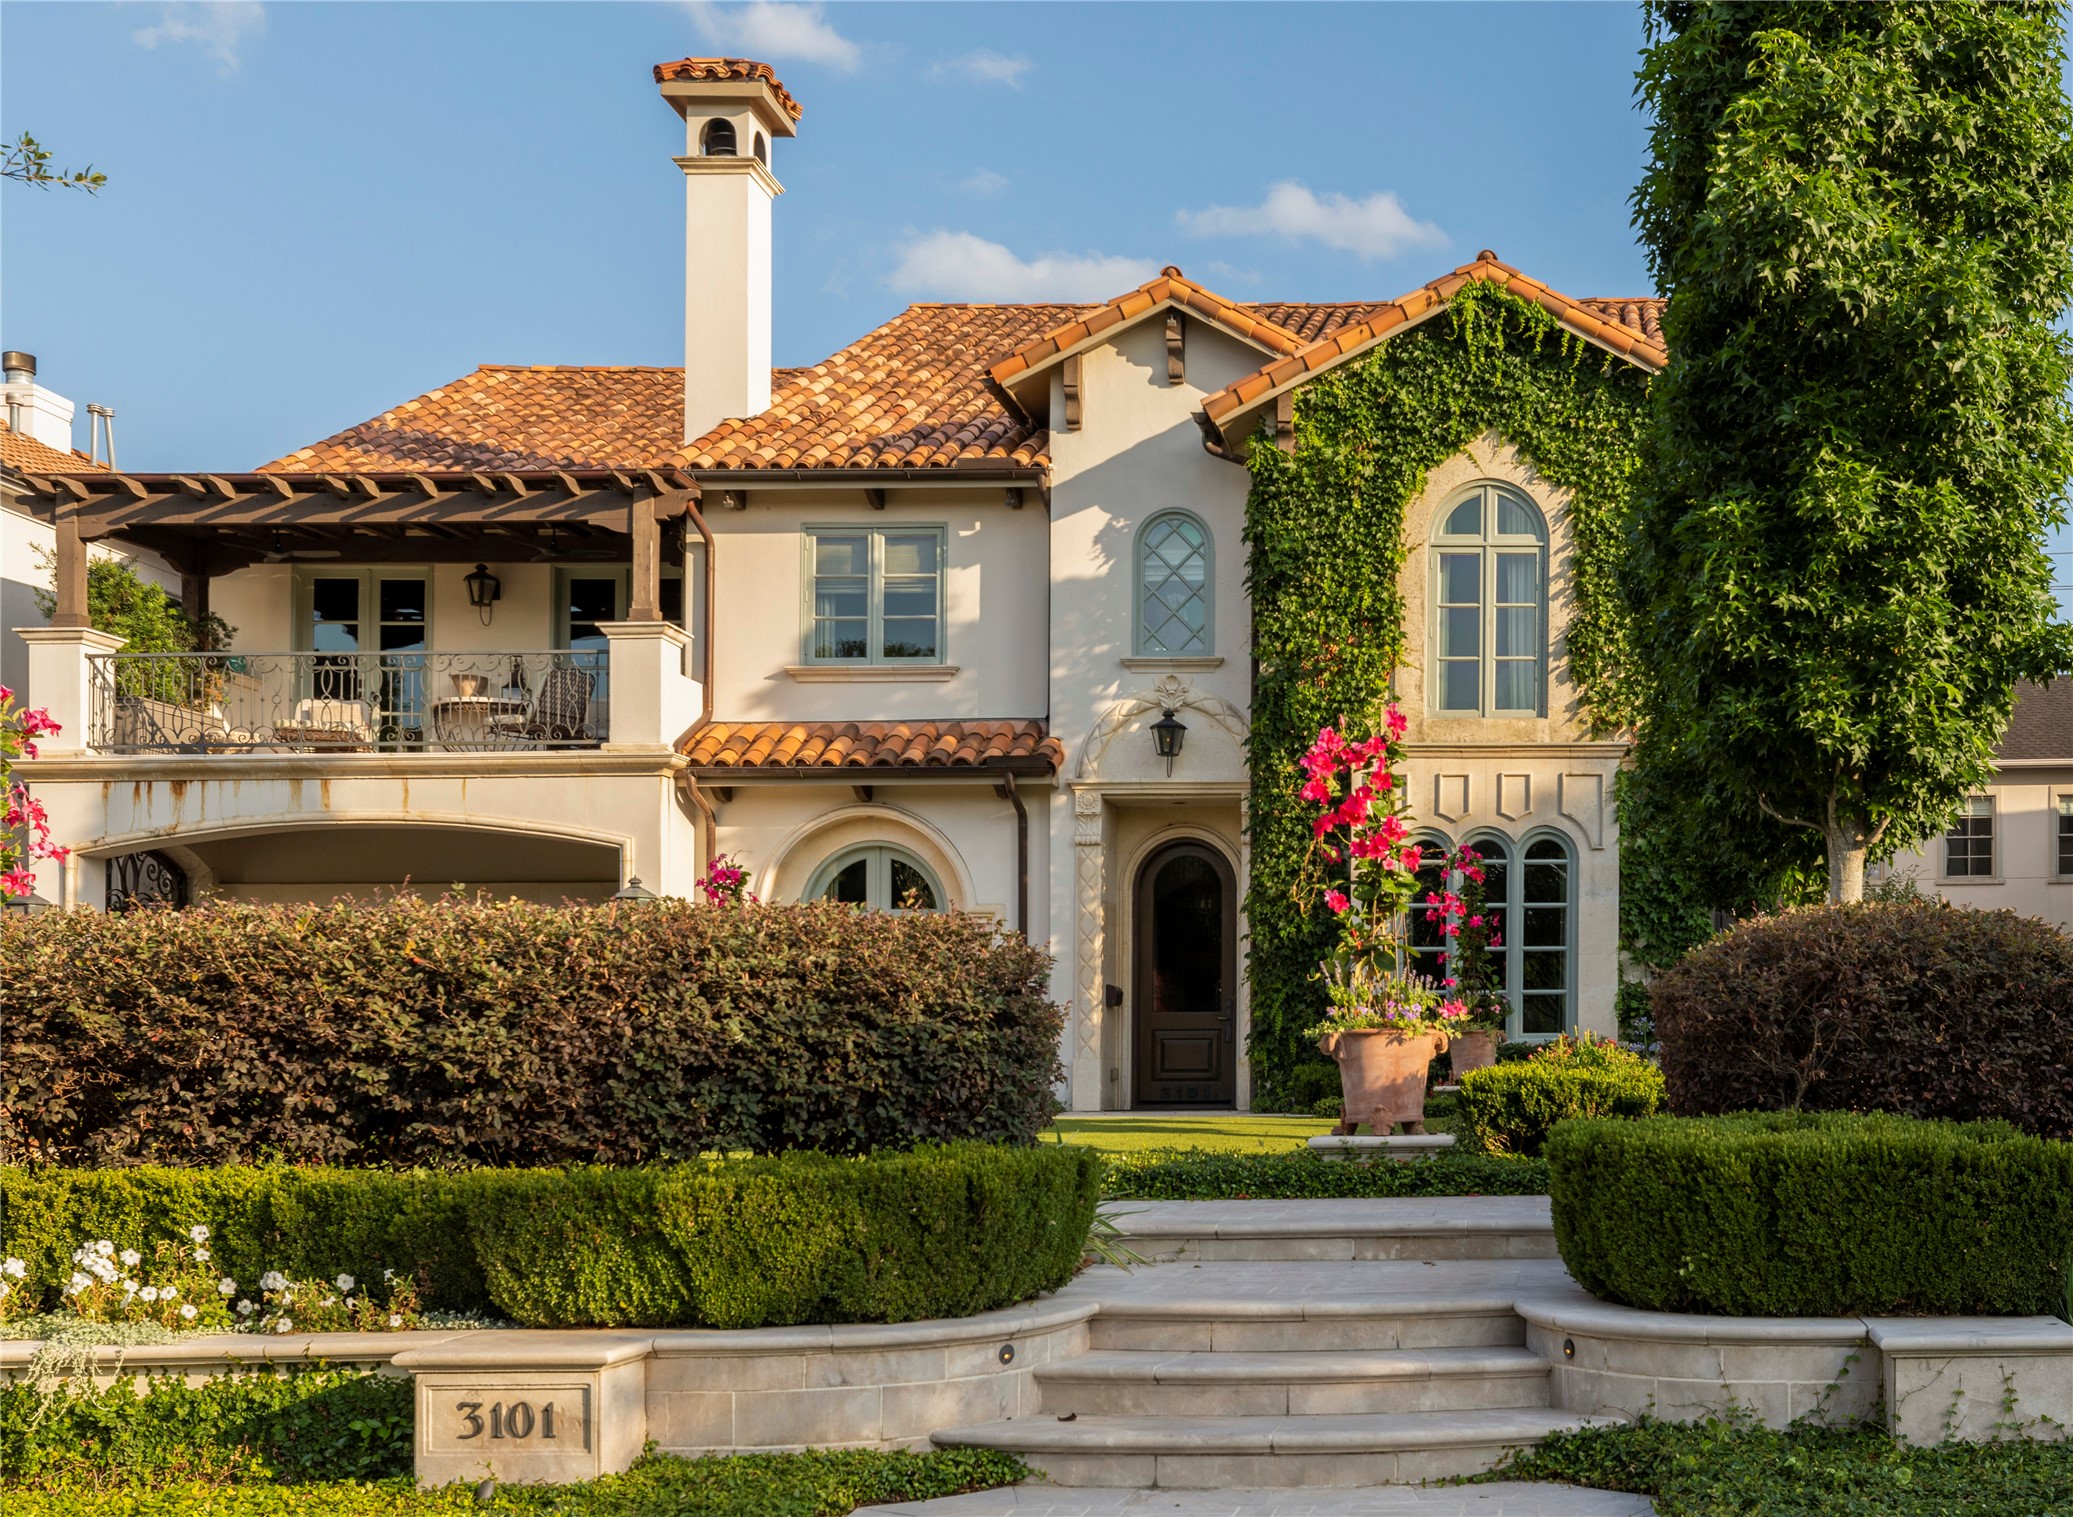 Welcome to 3101 Avalon Place - an enchanting home in the heart of Avalon Place. The exterior is exquisitely adorned with hand-carved limestone accents, a clay tile roof,  copper gutters and downspouts, and immaculately manicured grounds.